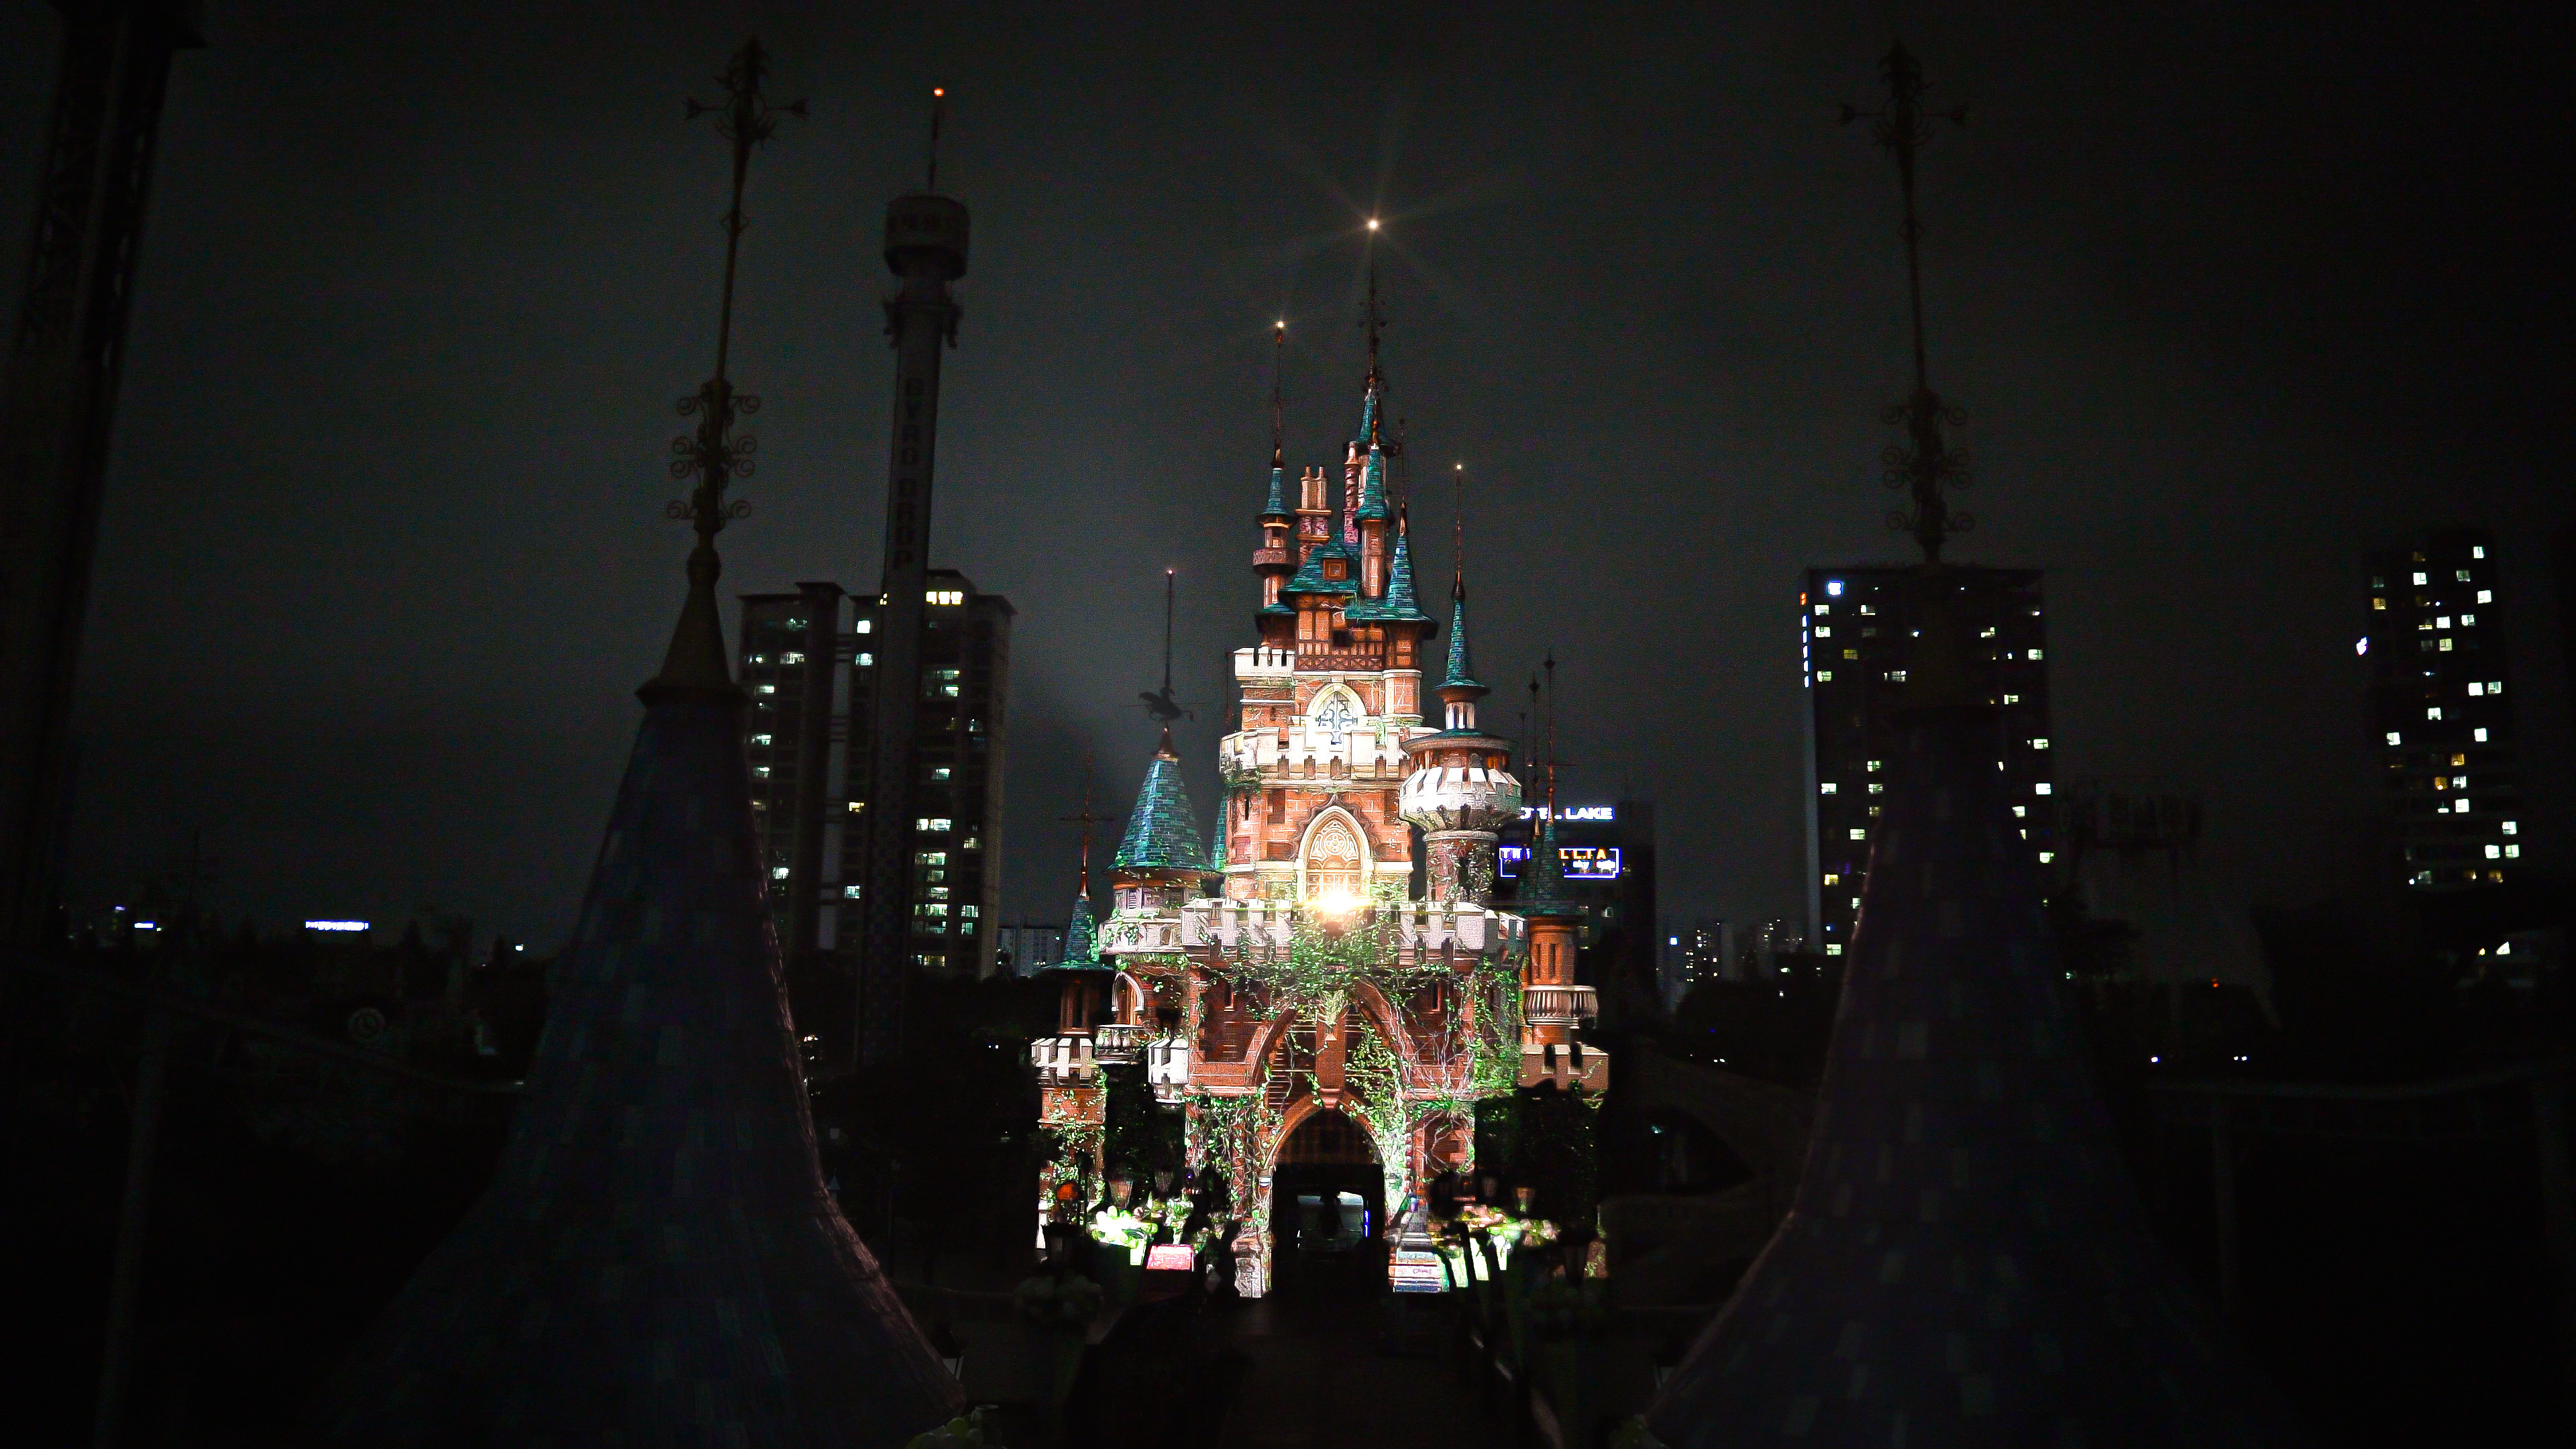 Magic Castle Lights-up 3D Mapping Show